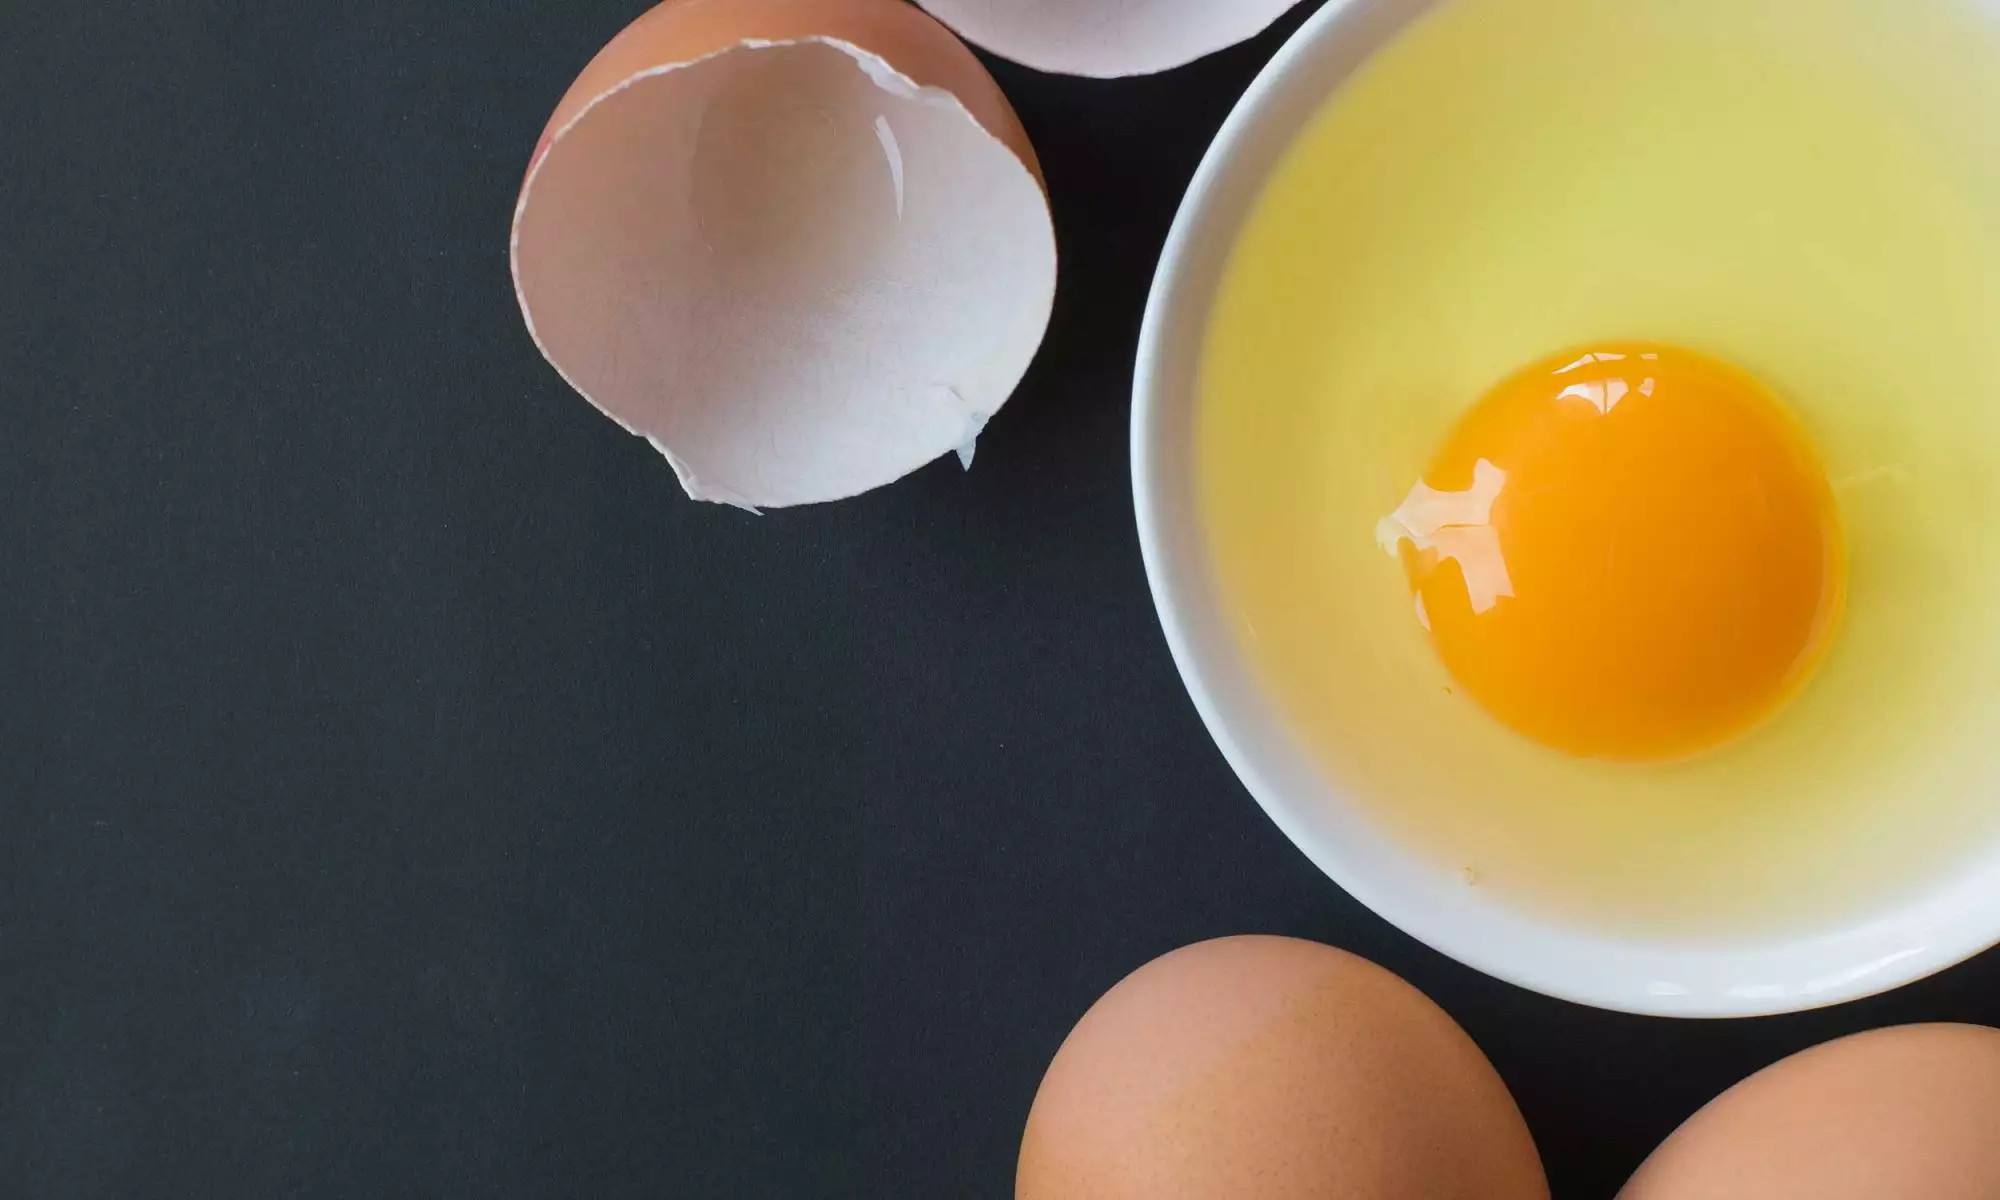 How much protein is in an egg